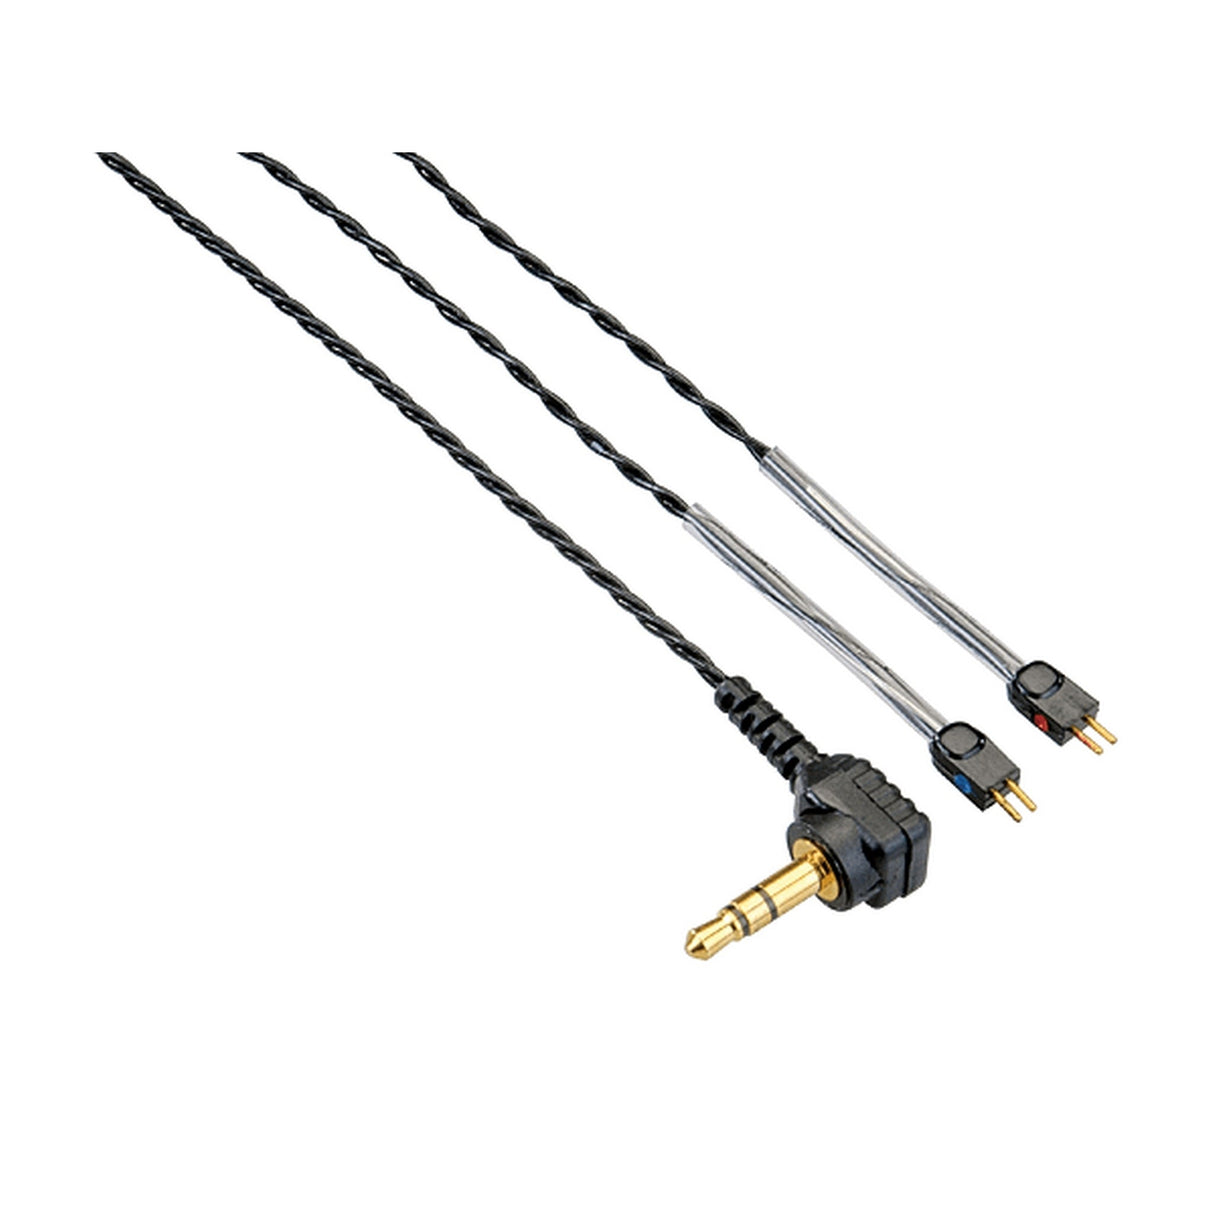 Westone EPIC 2-Pin Replacement Twisted Audio Cable with 3.5mm Connector